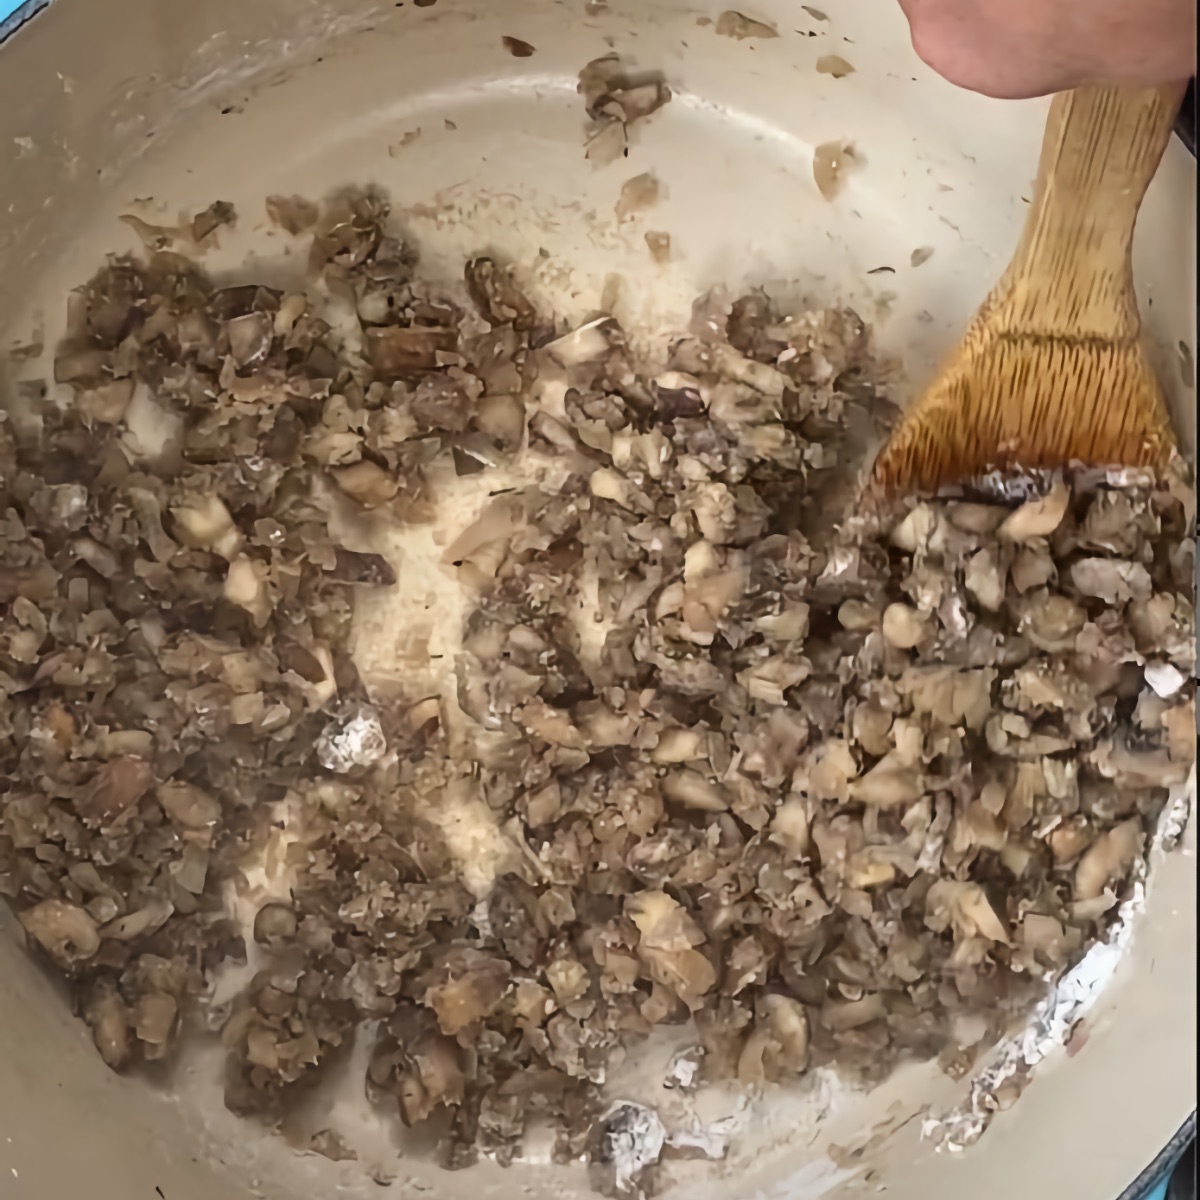 Mixing the flour into the mushroom mixture and cooking the roux.